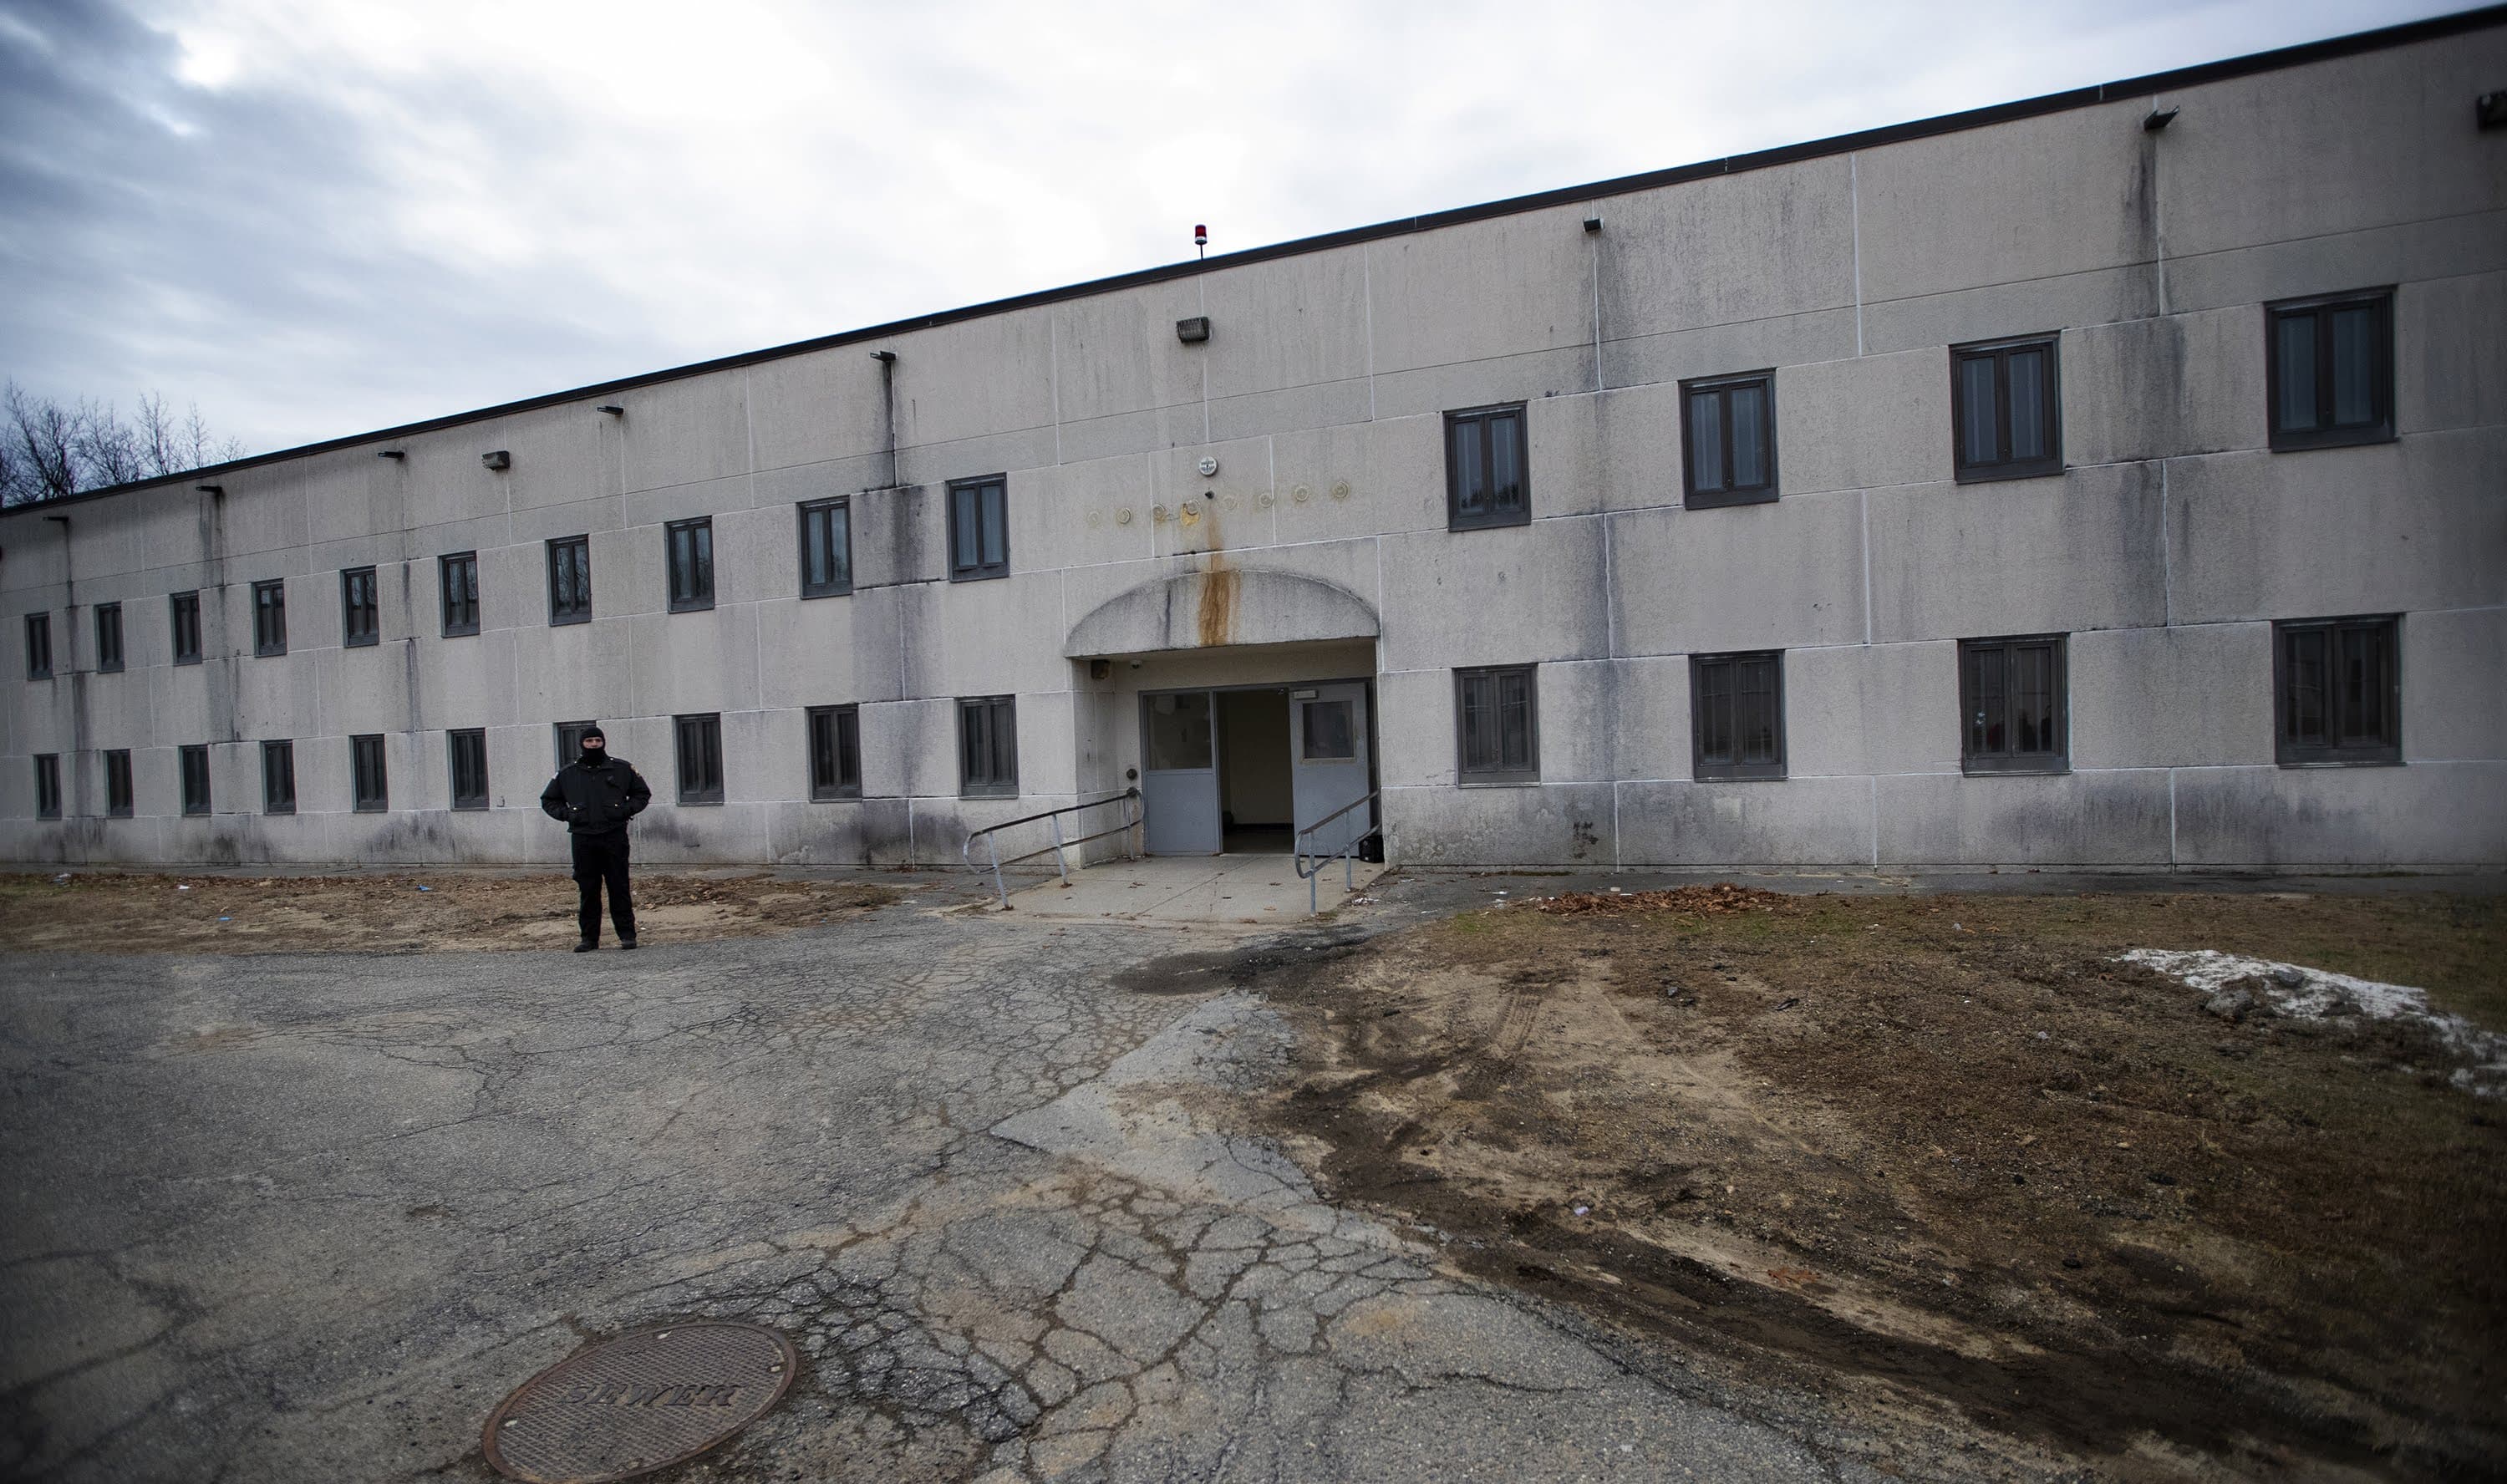 The exterior of the Worcester County jail. (Jesse Costa/WBUR)